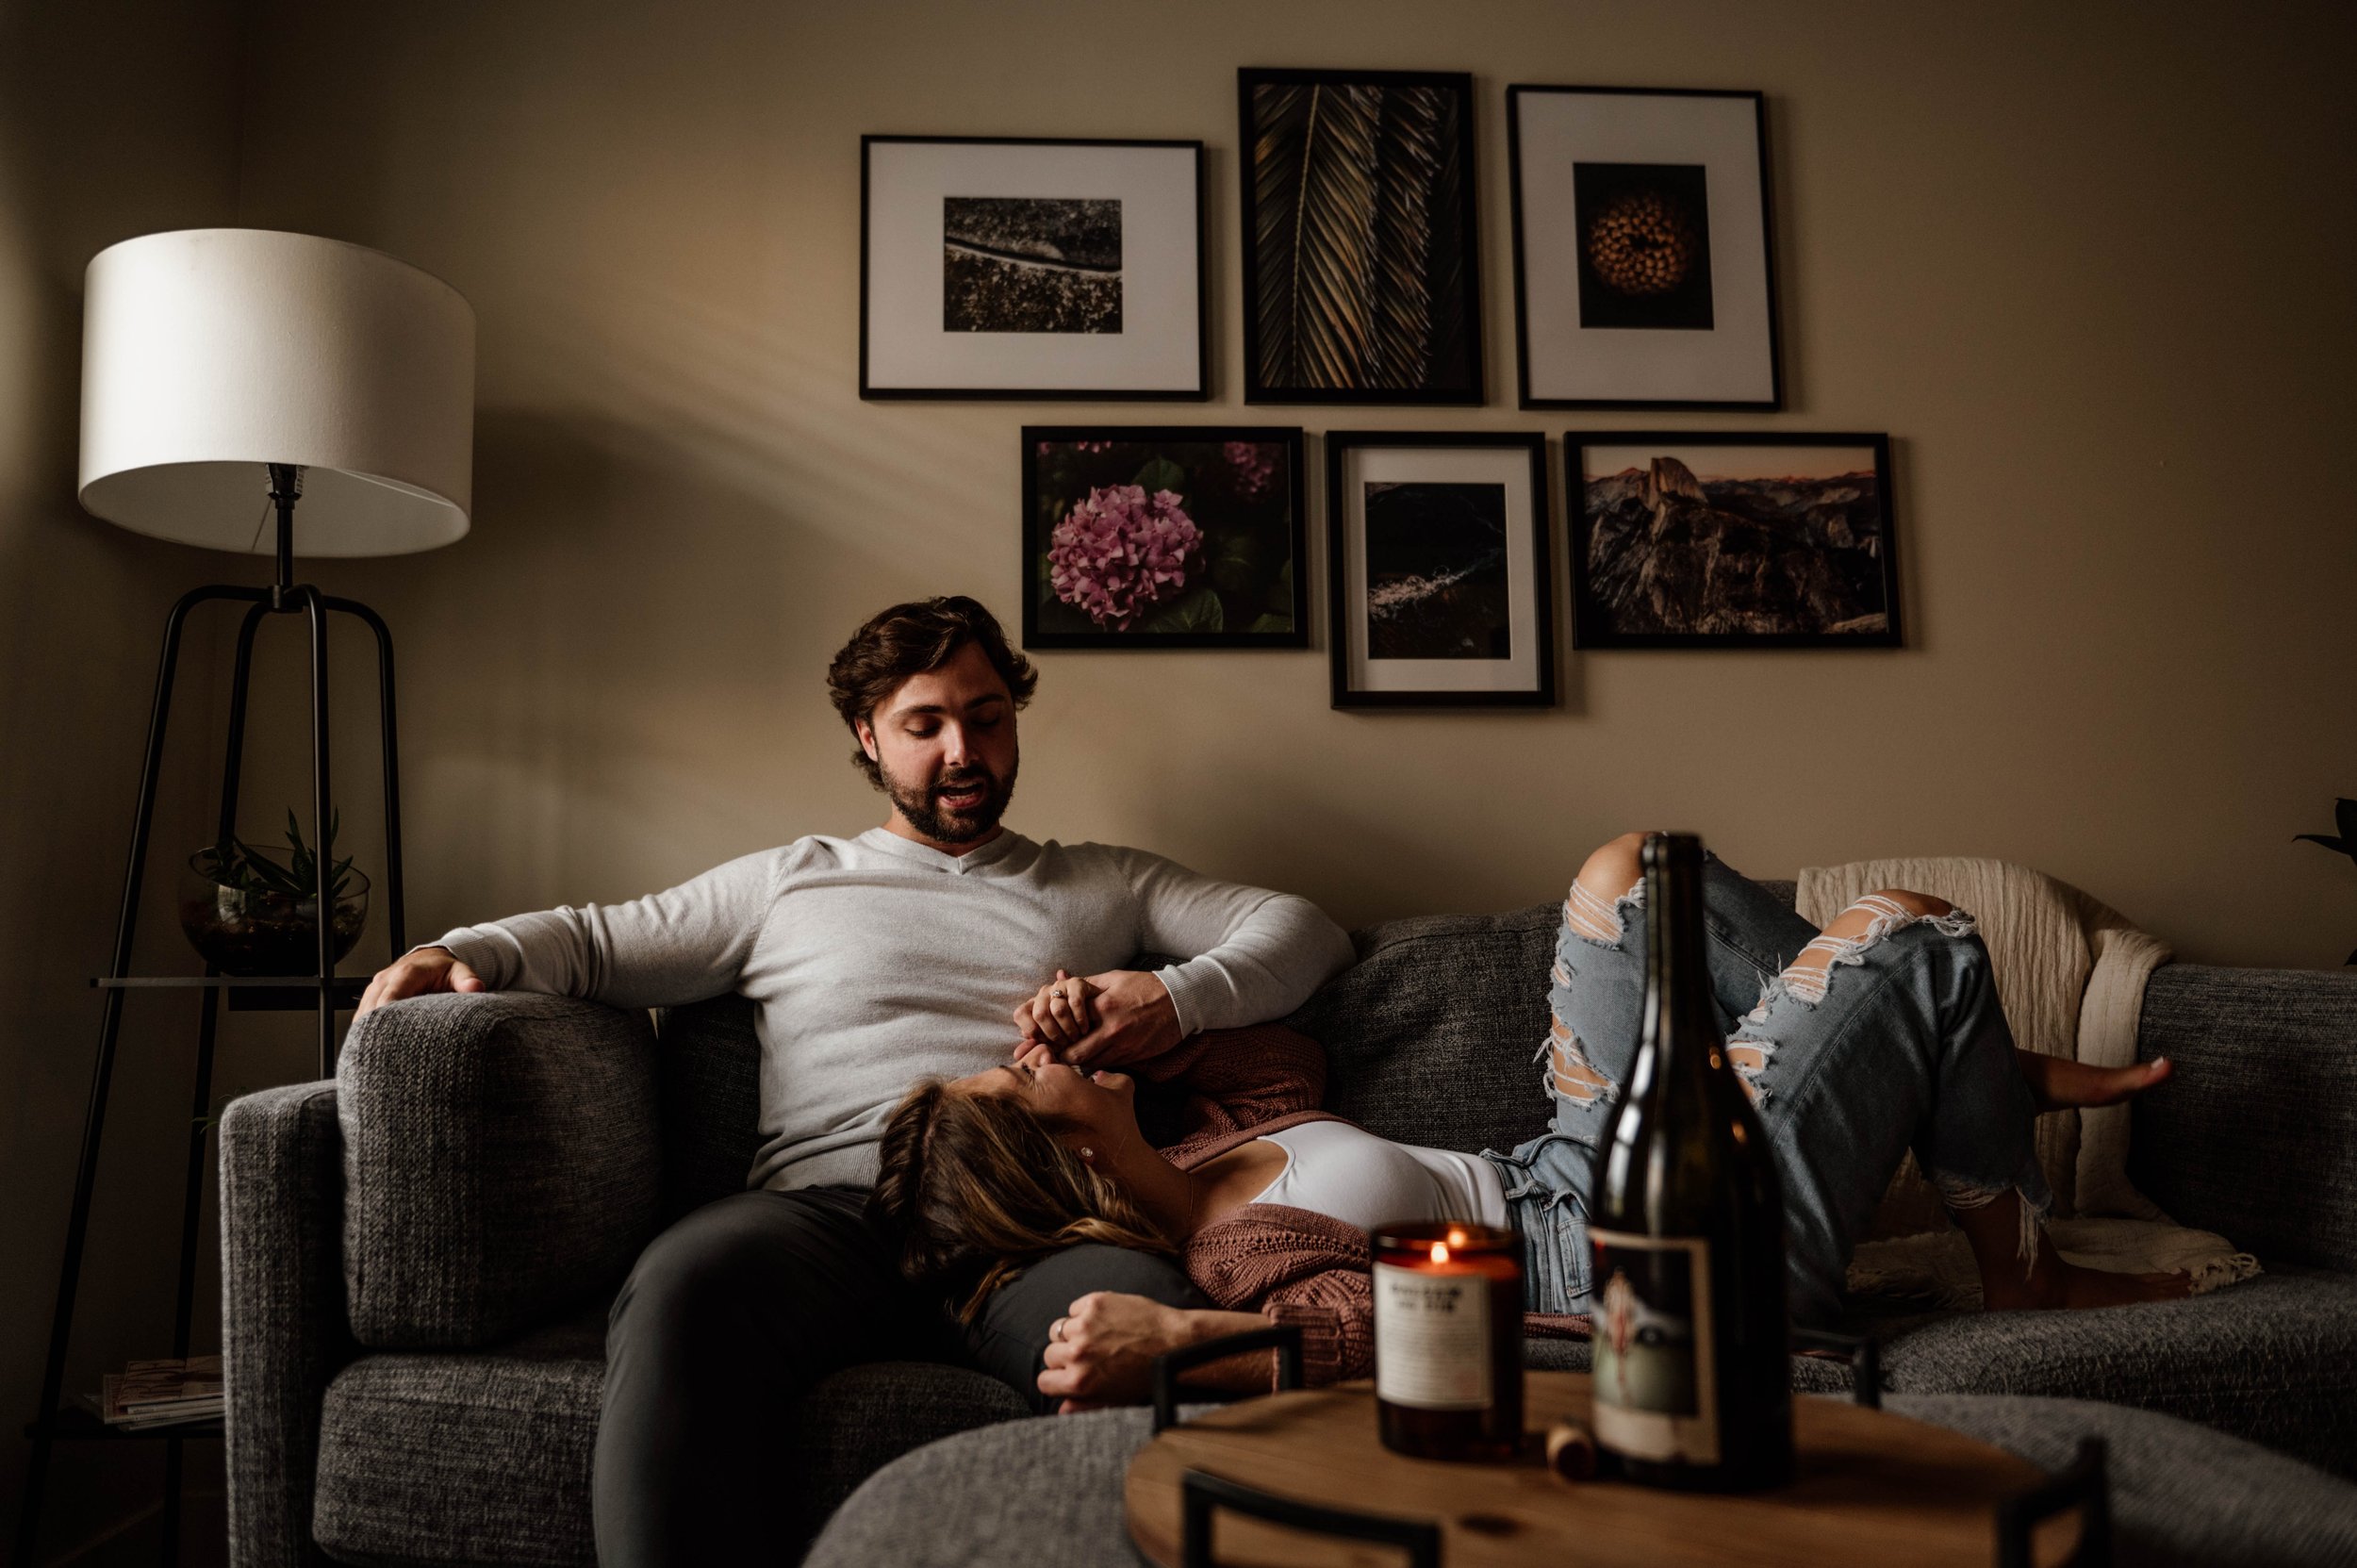 EMILY + LAIRD // AN AT HOME ENGAGEMENT SESSION